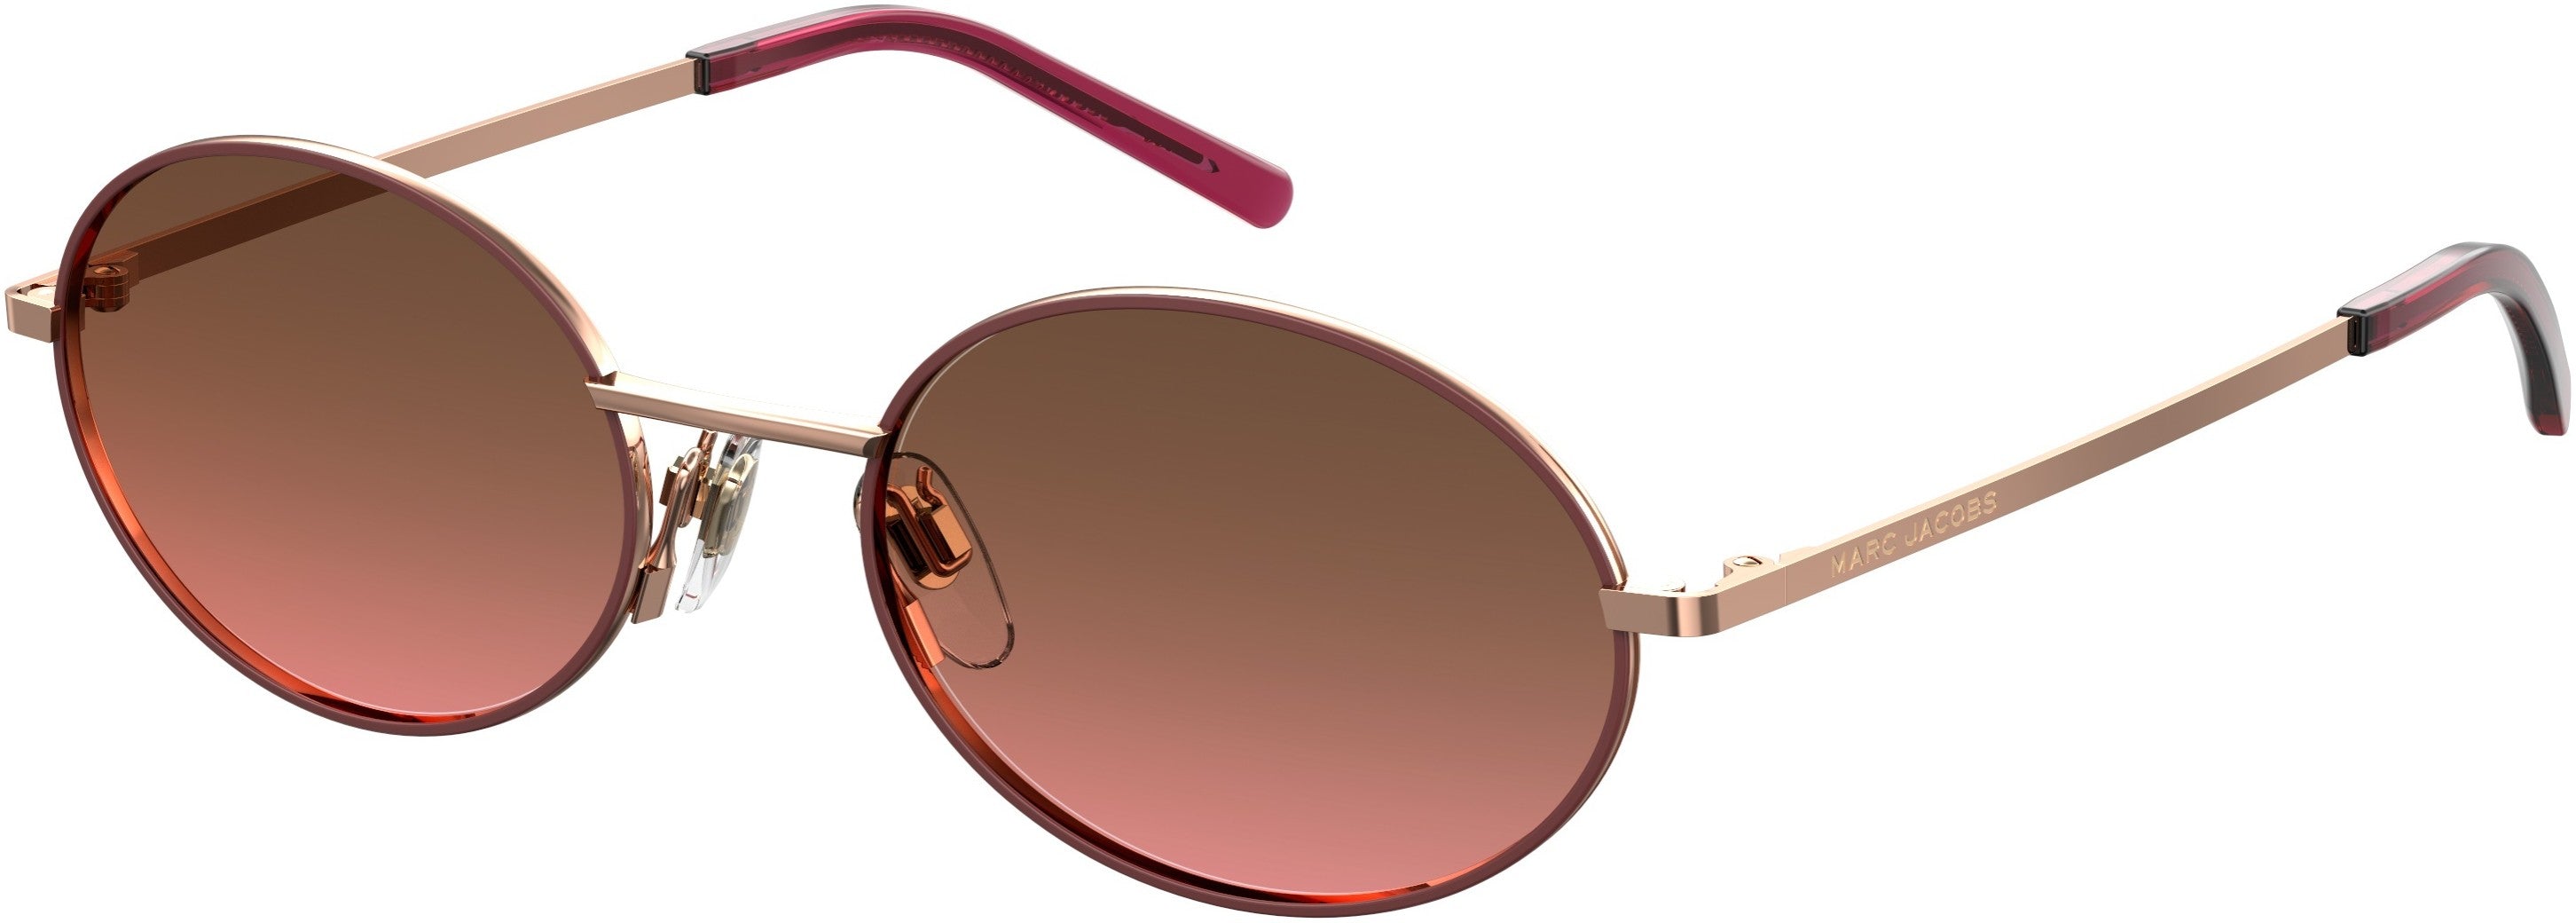 Marc Jacobs Marc 408/S Oval Modified Sunglasses 0DDB-0DDB  Gold Copper (M2 Brown Pink Gradient)